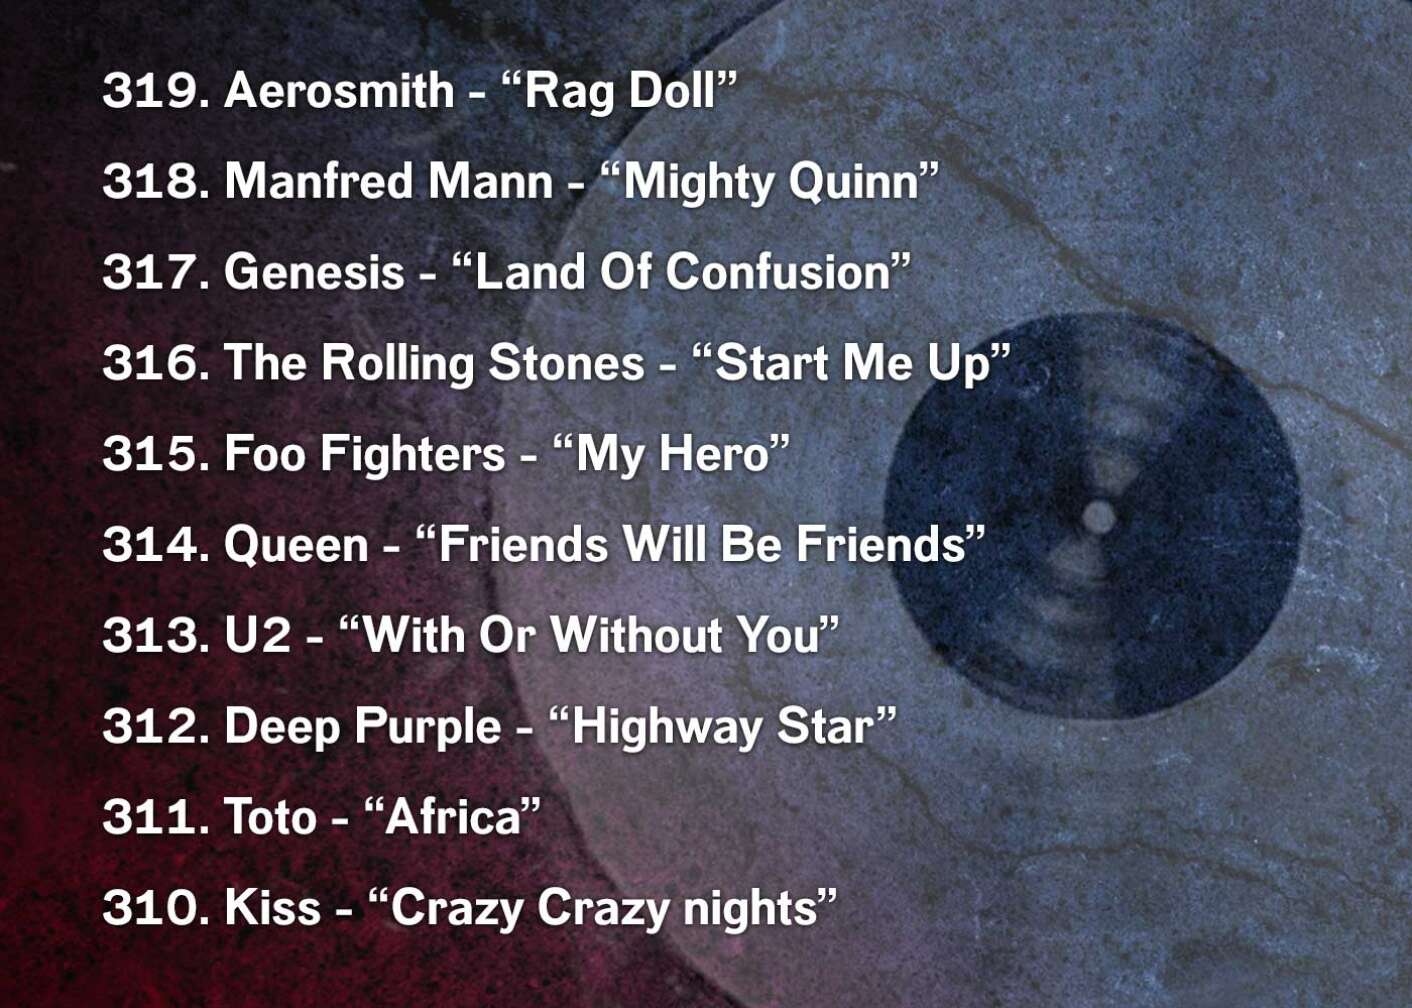 319. Aerosmith - “Rag Doll” 318. Manfred Mann - “Mighty Quinn” 317. Genesis - “Land Of Confusion” 316. The Rolling Stones - “Start Me Up” 315. Foo Fighters - “My Hero” 314. Queen - “Friends Will Be Friends” 313. U2 - “With Or Without You” 312. Deep Purple - “Highway Star” 311. Toto - “Africa” 310. Kiss - “Crazy Crazy nights”